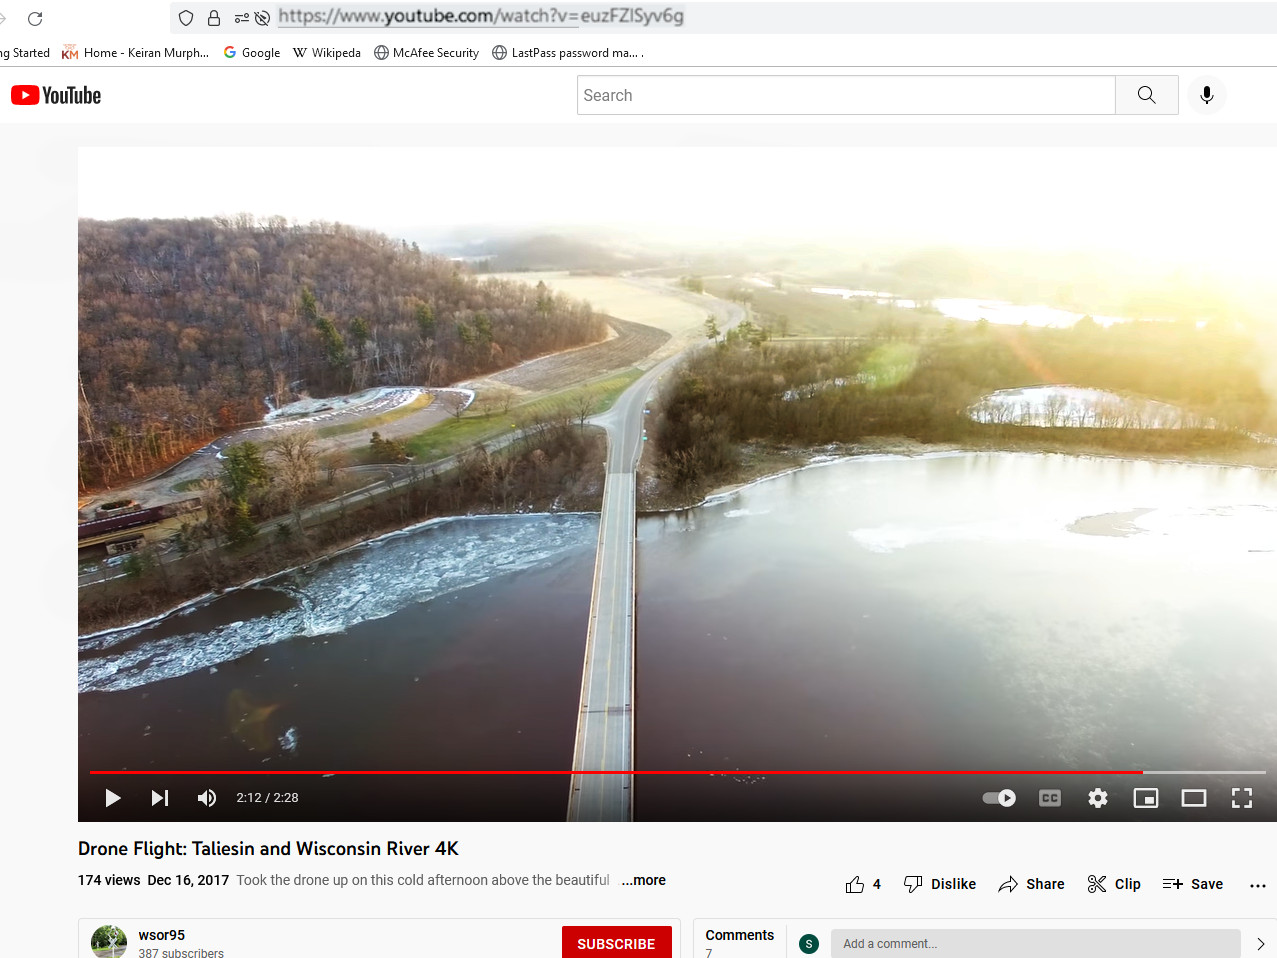 Screenshot from a drone flight taken in December, 2017. It shows the Wisconsin River and the Taliesin estate.